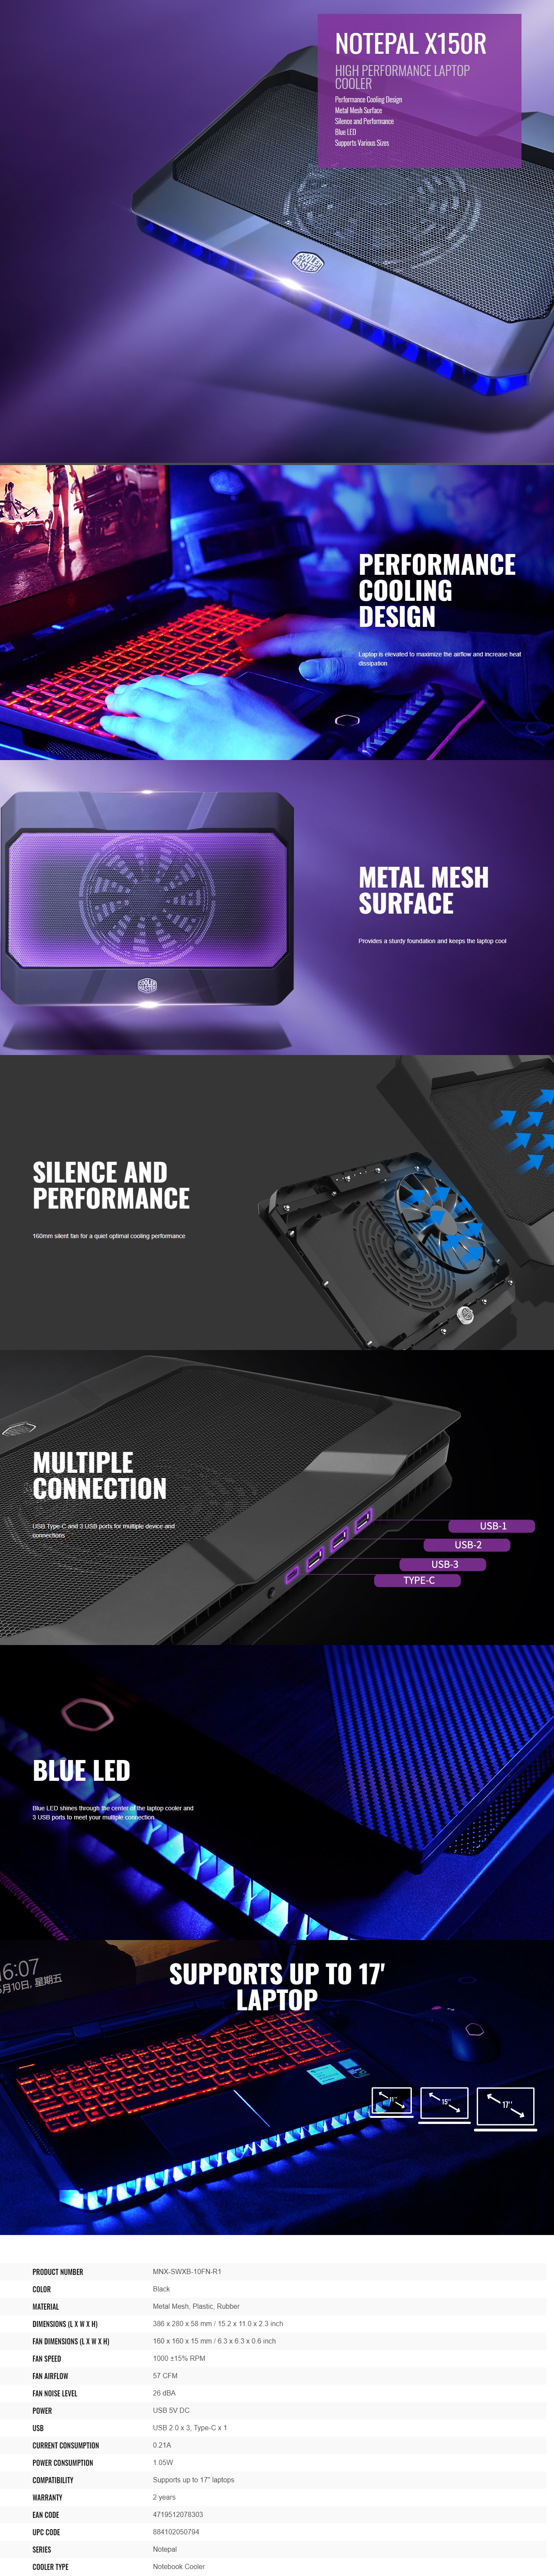 A large marketing image providing additional information about the product Cooler Master Notepal X150R Performance Cooling Pad - Additional alt info not provided